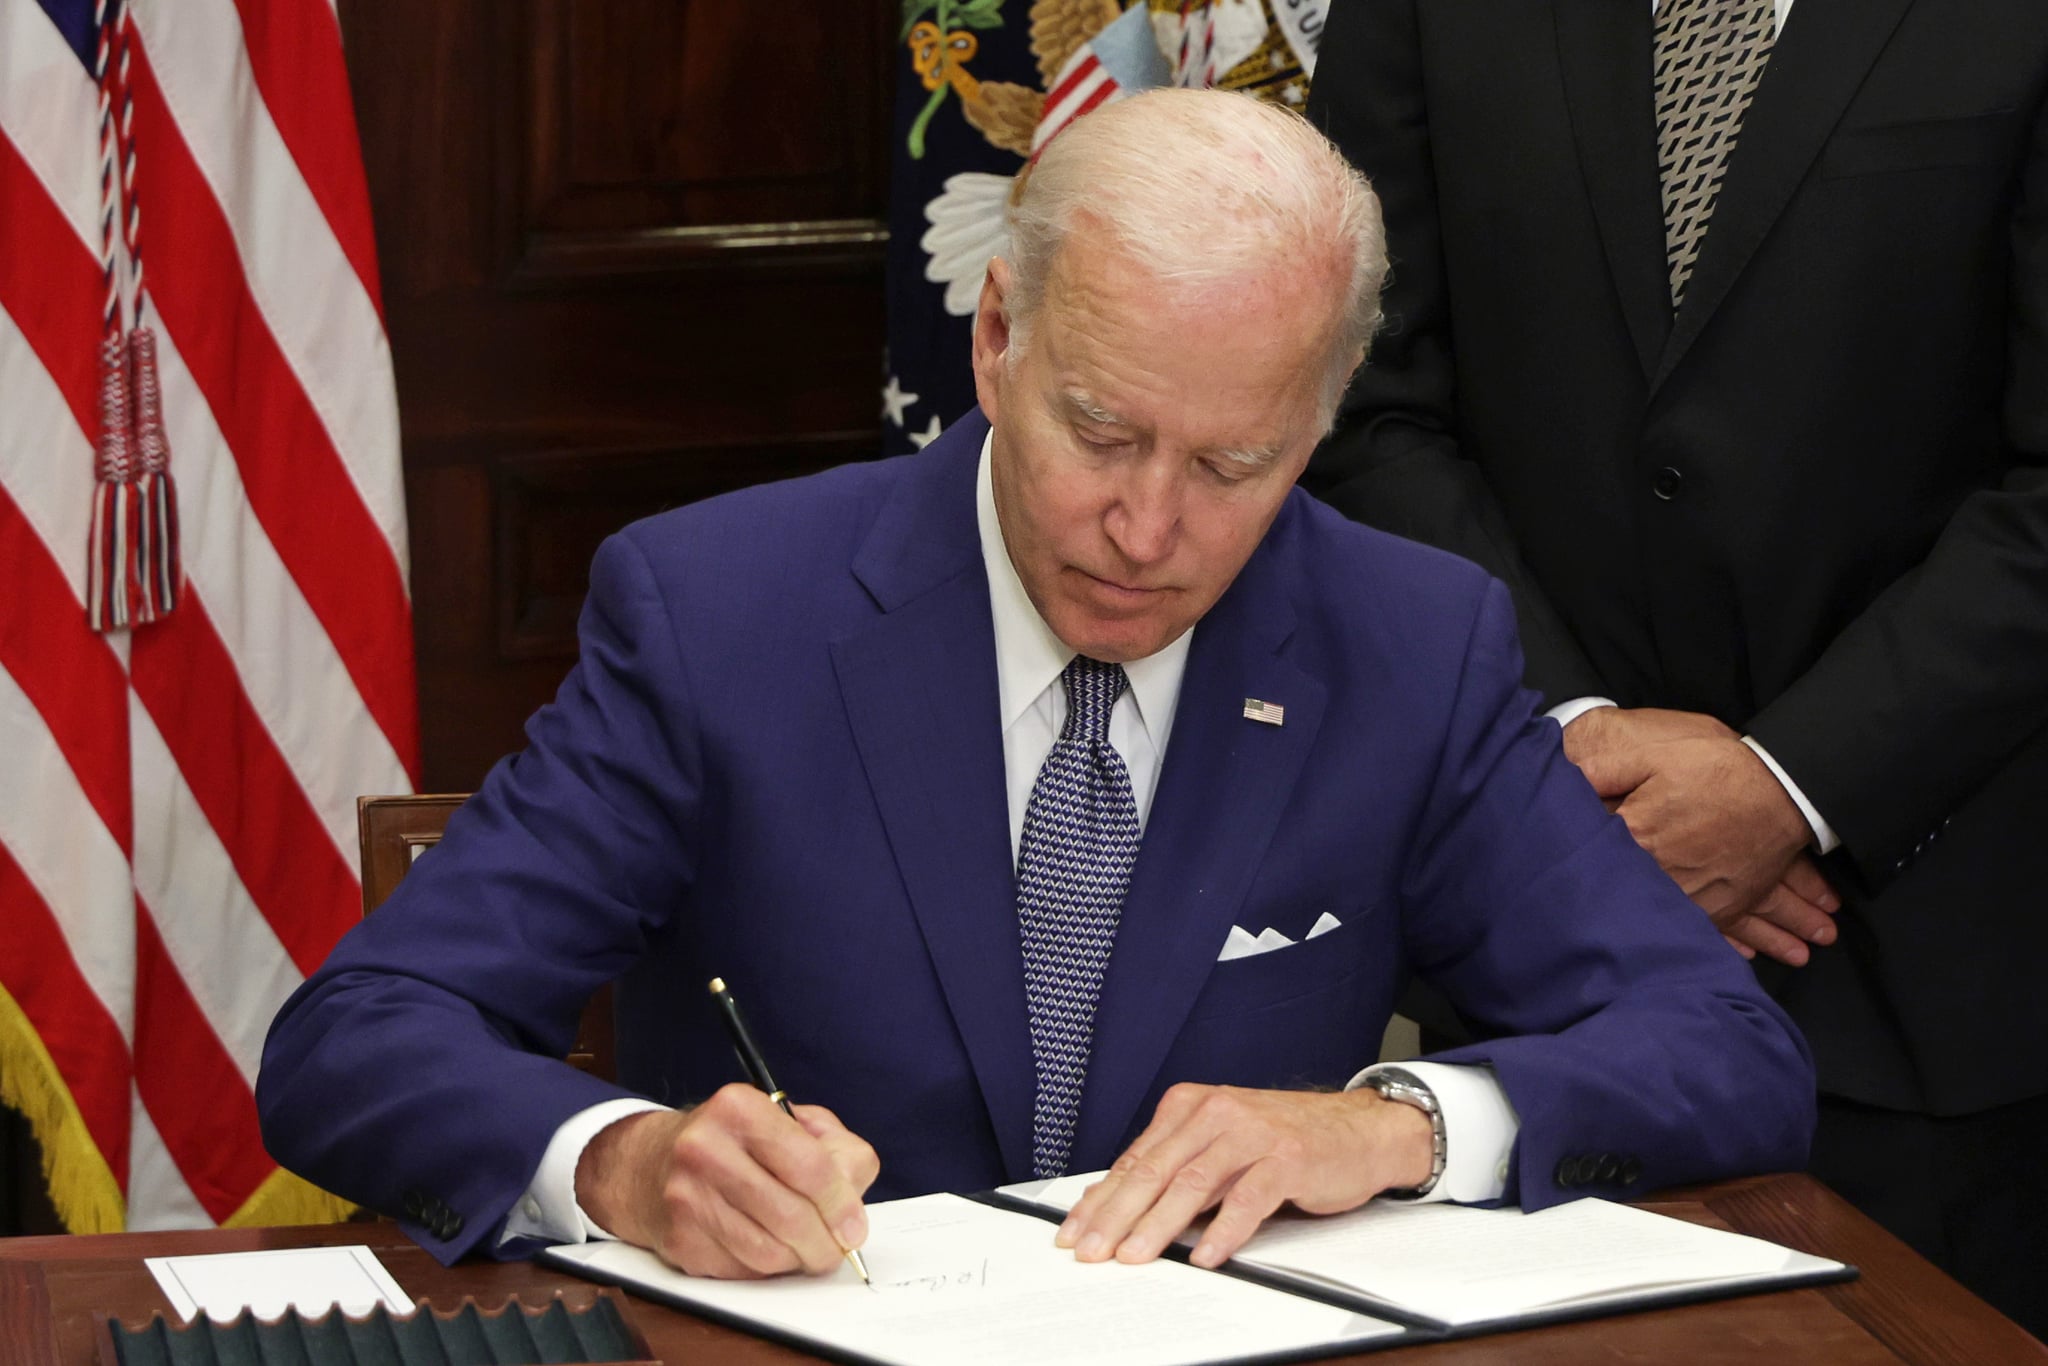 WASHINGTON, DC - JULY 08: U.S. President Joe Biden signs an executive order on access to reproductive health care services during an event at the Roosevelt Room of the White House on July 8, 2022 in Washington, DC. President Biden delivered remarks on reproductive rights at the event. (Photo by Alex Wong/Getty Images)